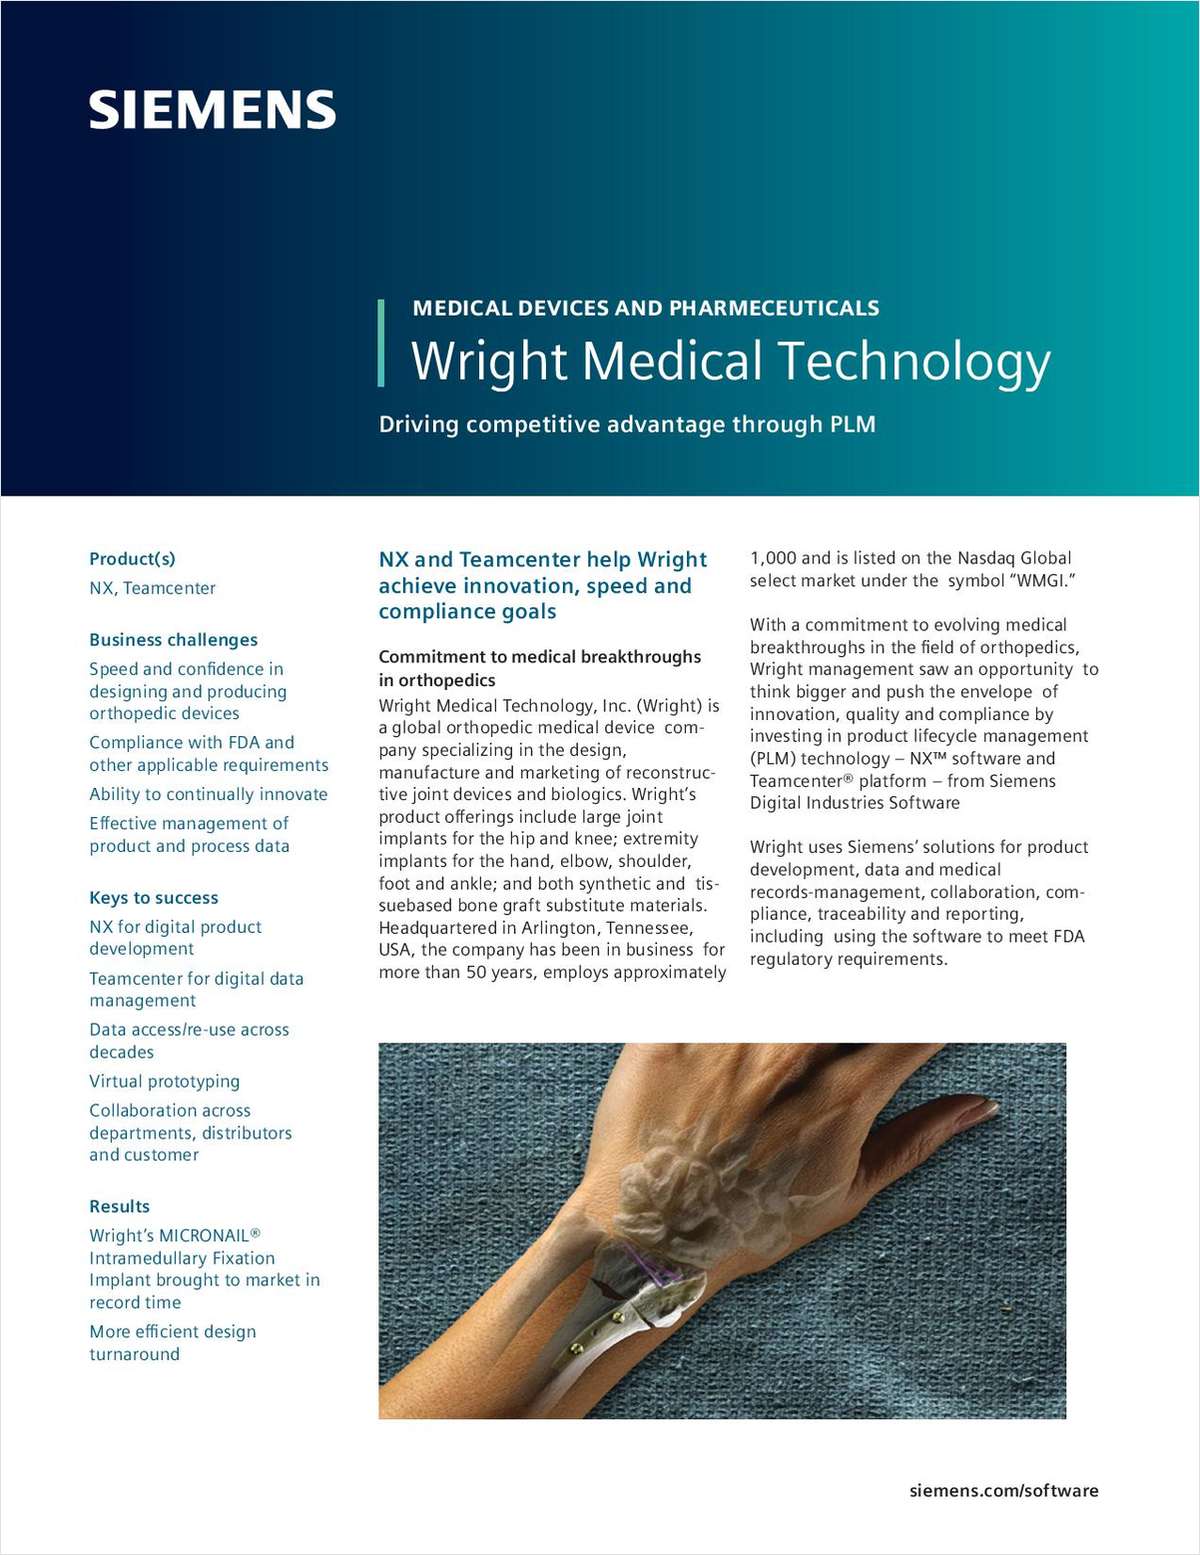 Orthopedic Company's Use of PLM Speeds Innovation, Compliance, and Design-to-Market time